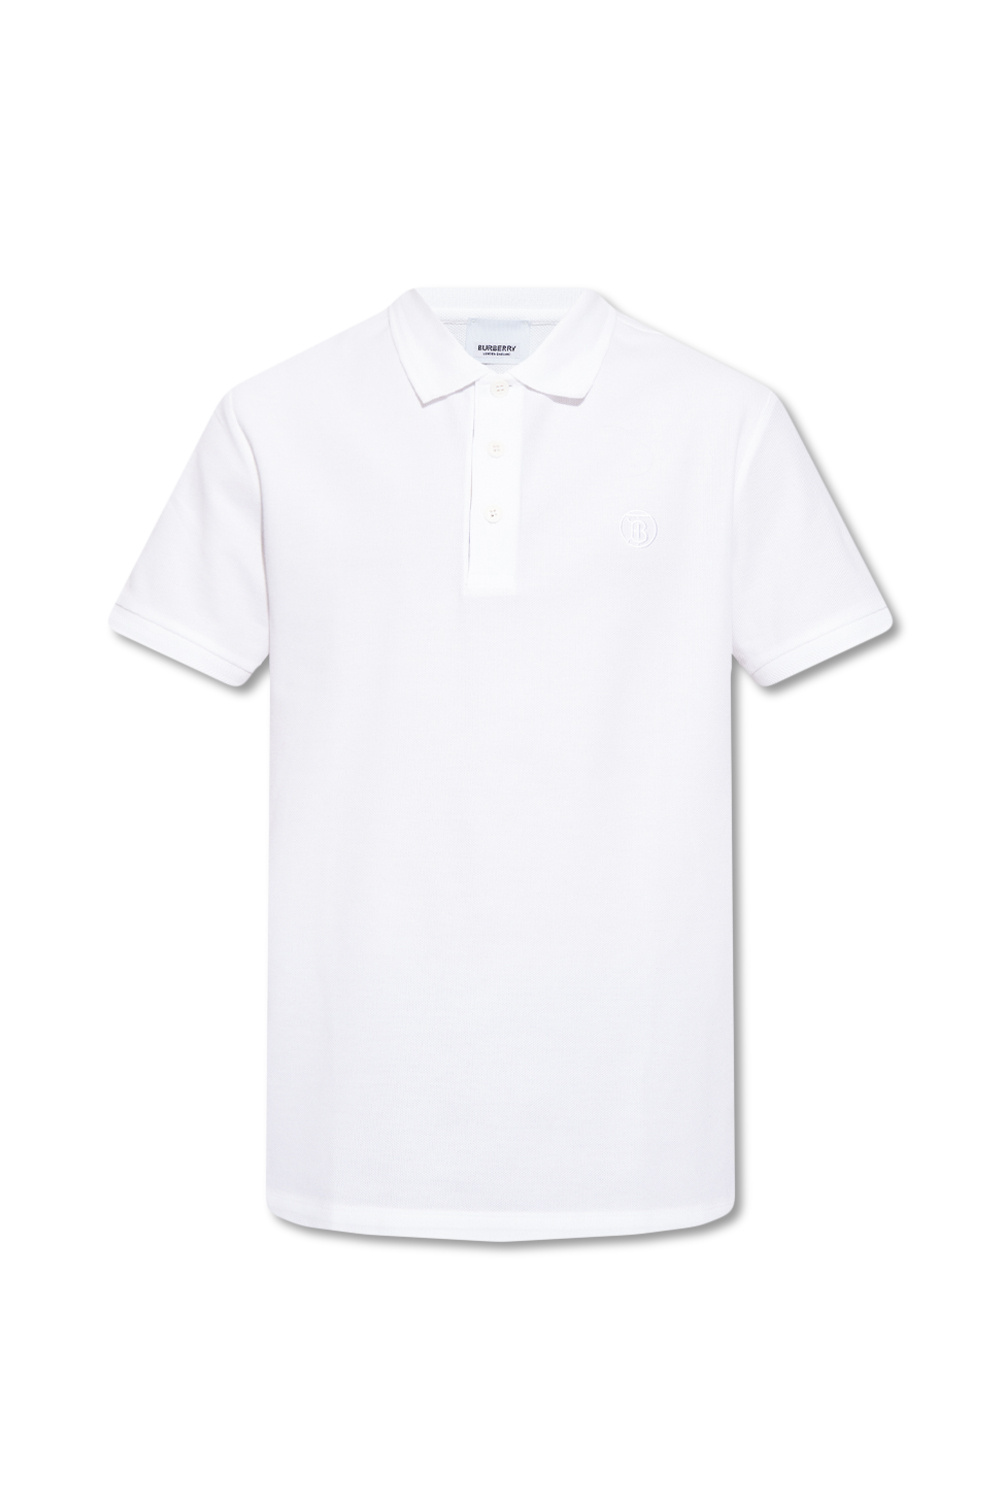 Burberry ‘Eddie’ polo Connection shirt with logo